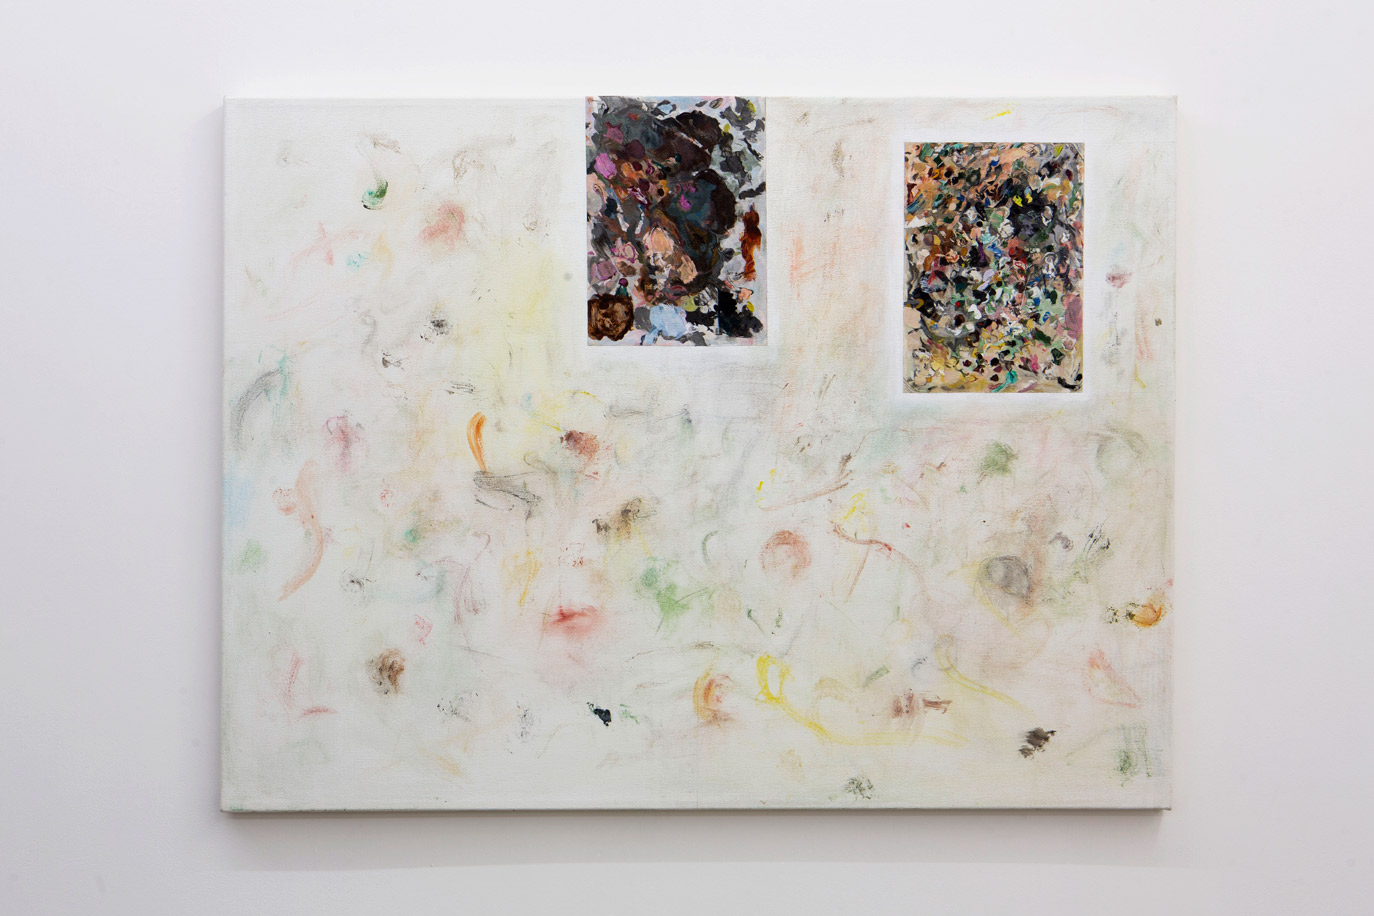 Stuart Brisley: Palettes from The Museum of Ordure 2020 Acrylic on gesso on canvas, 92 cm x 122 cm